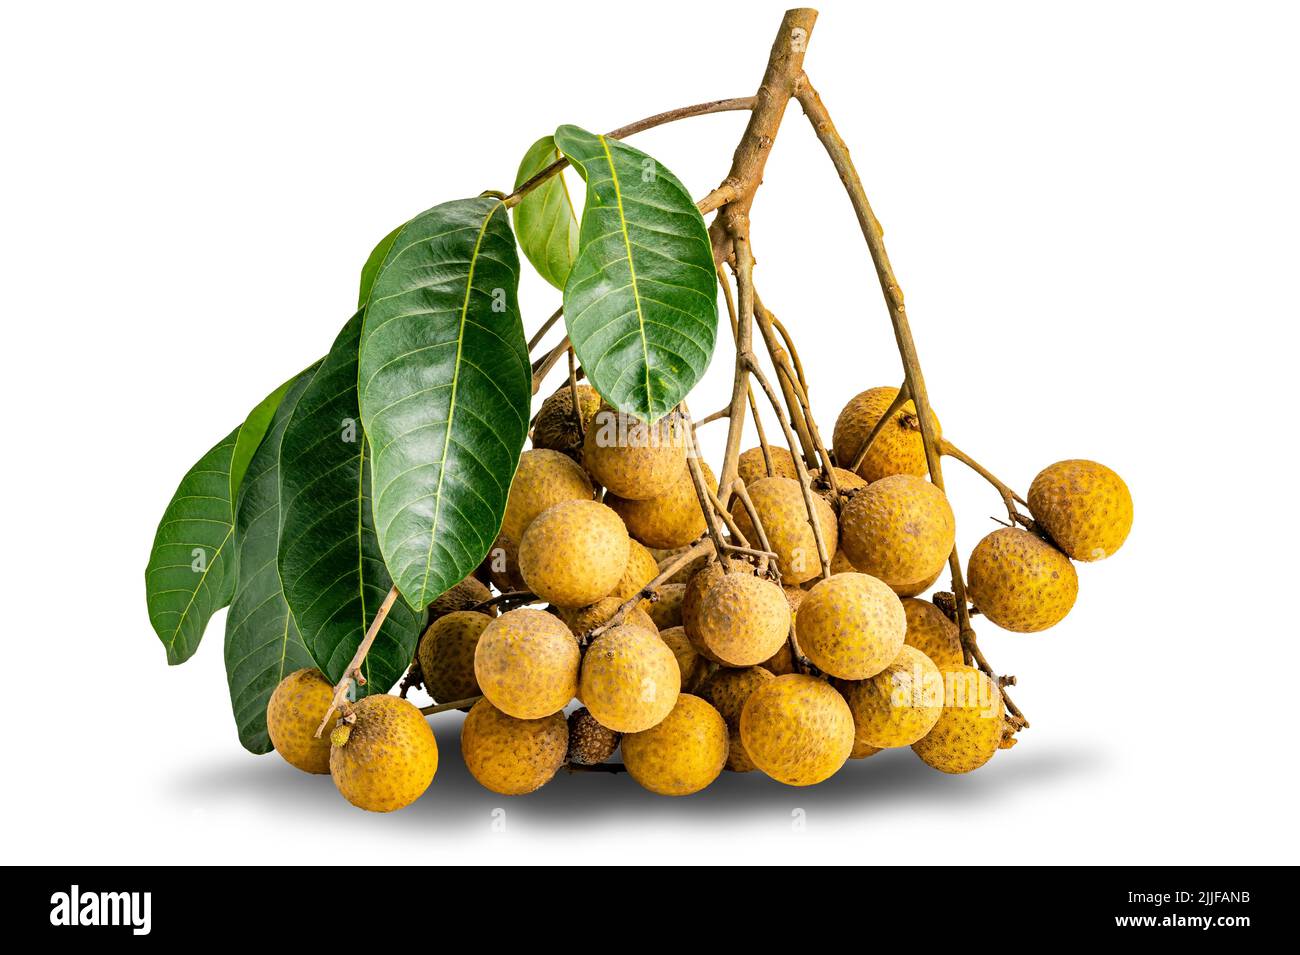 Bunch of fresh longan fruit with leaves and stalk isolated on white background with clipping path. Stock Photo